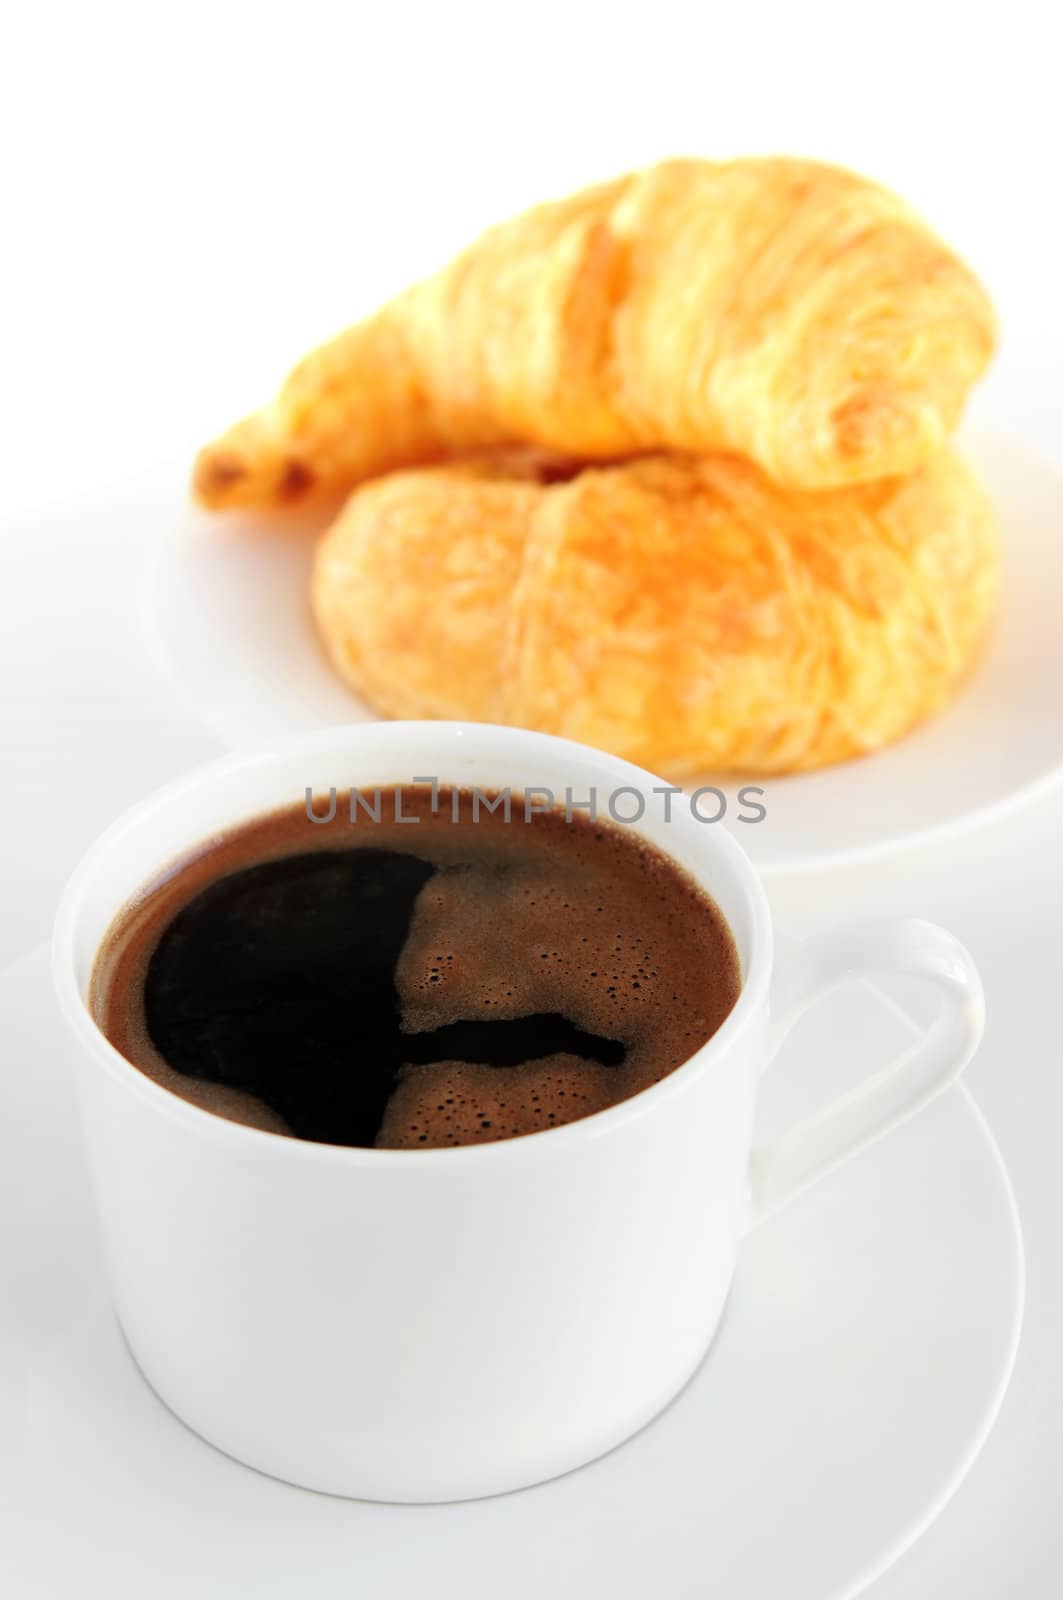 Coffee and croisssants by elenathewise